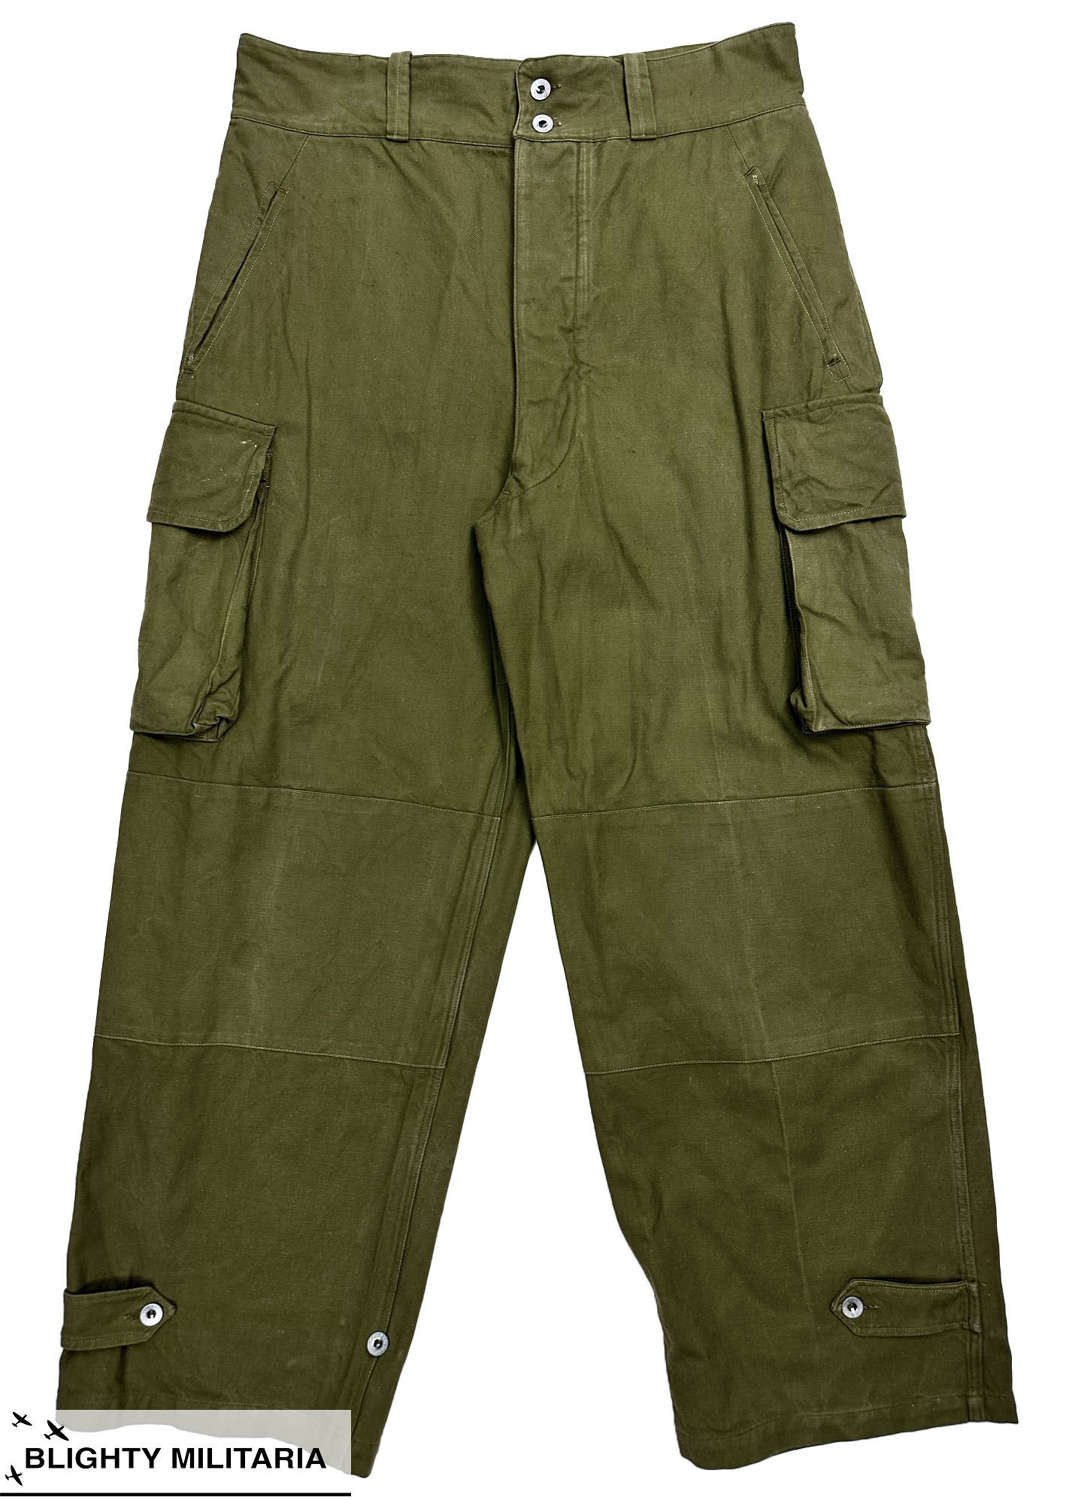 Original French Army M47 Combat Trousers - Size 35